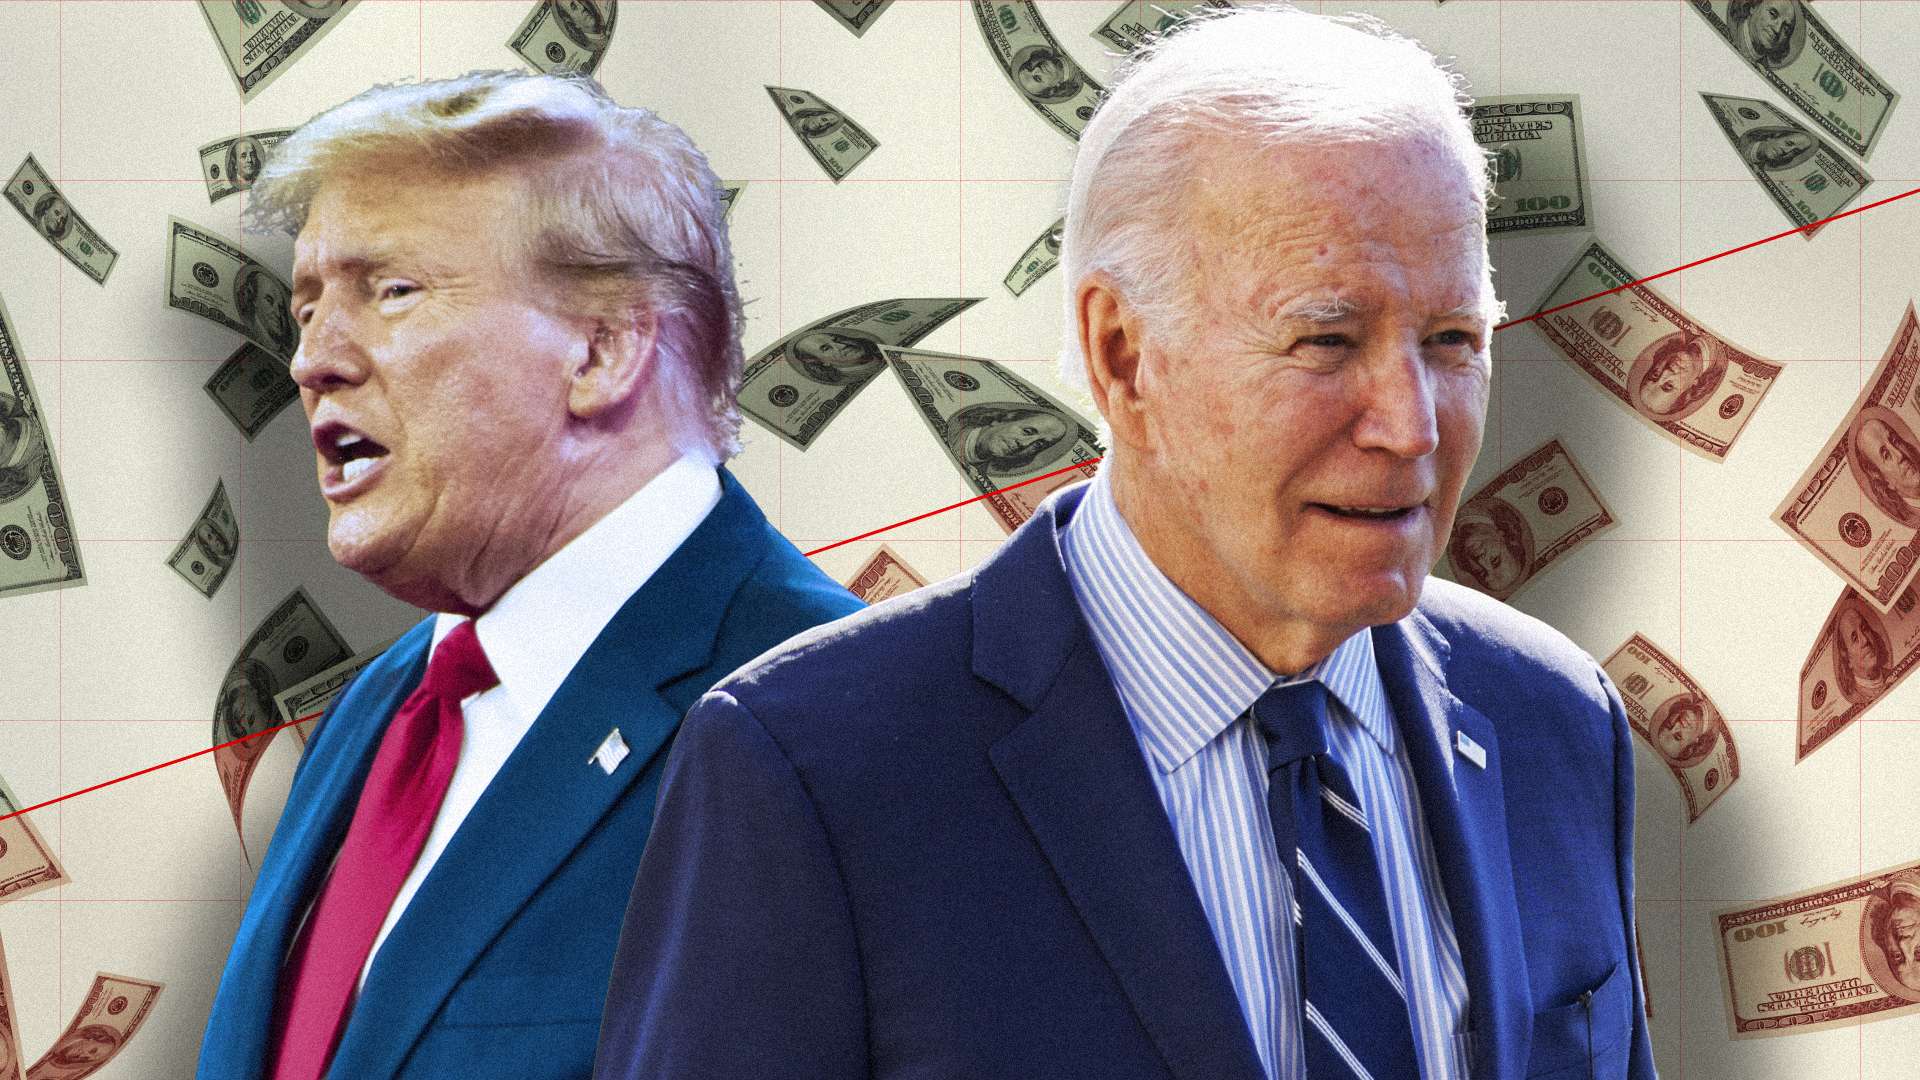 Brian Riedl: Who bankrupted us more—Trump or Biden?